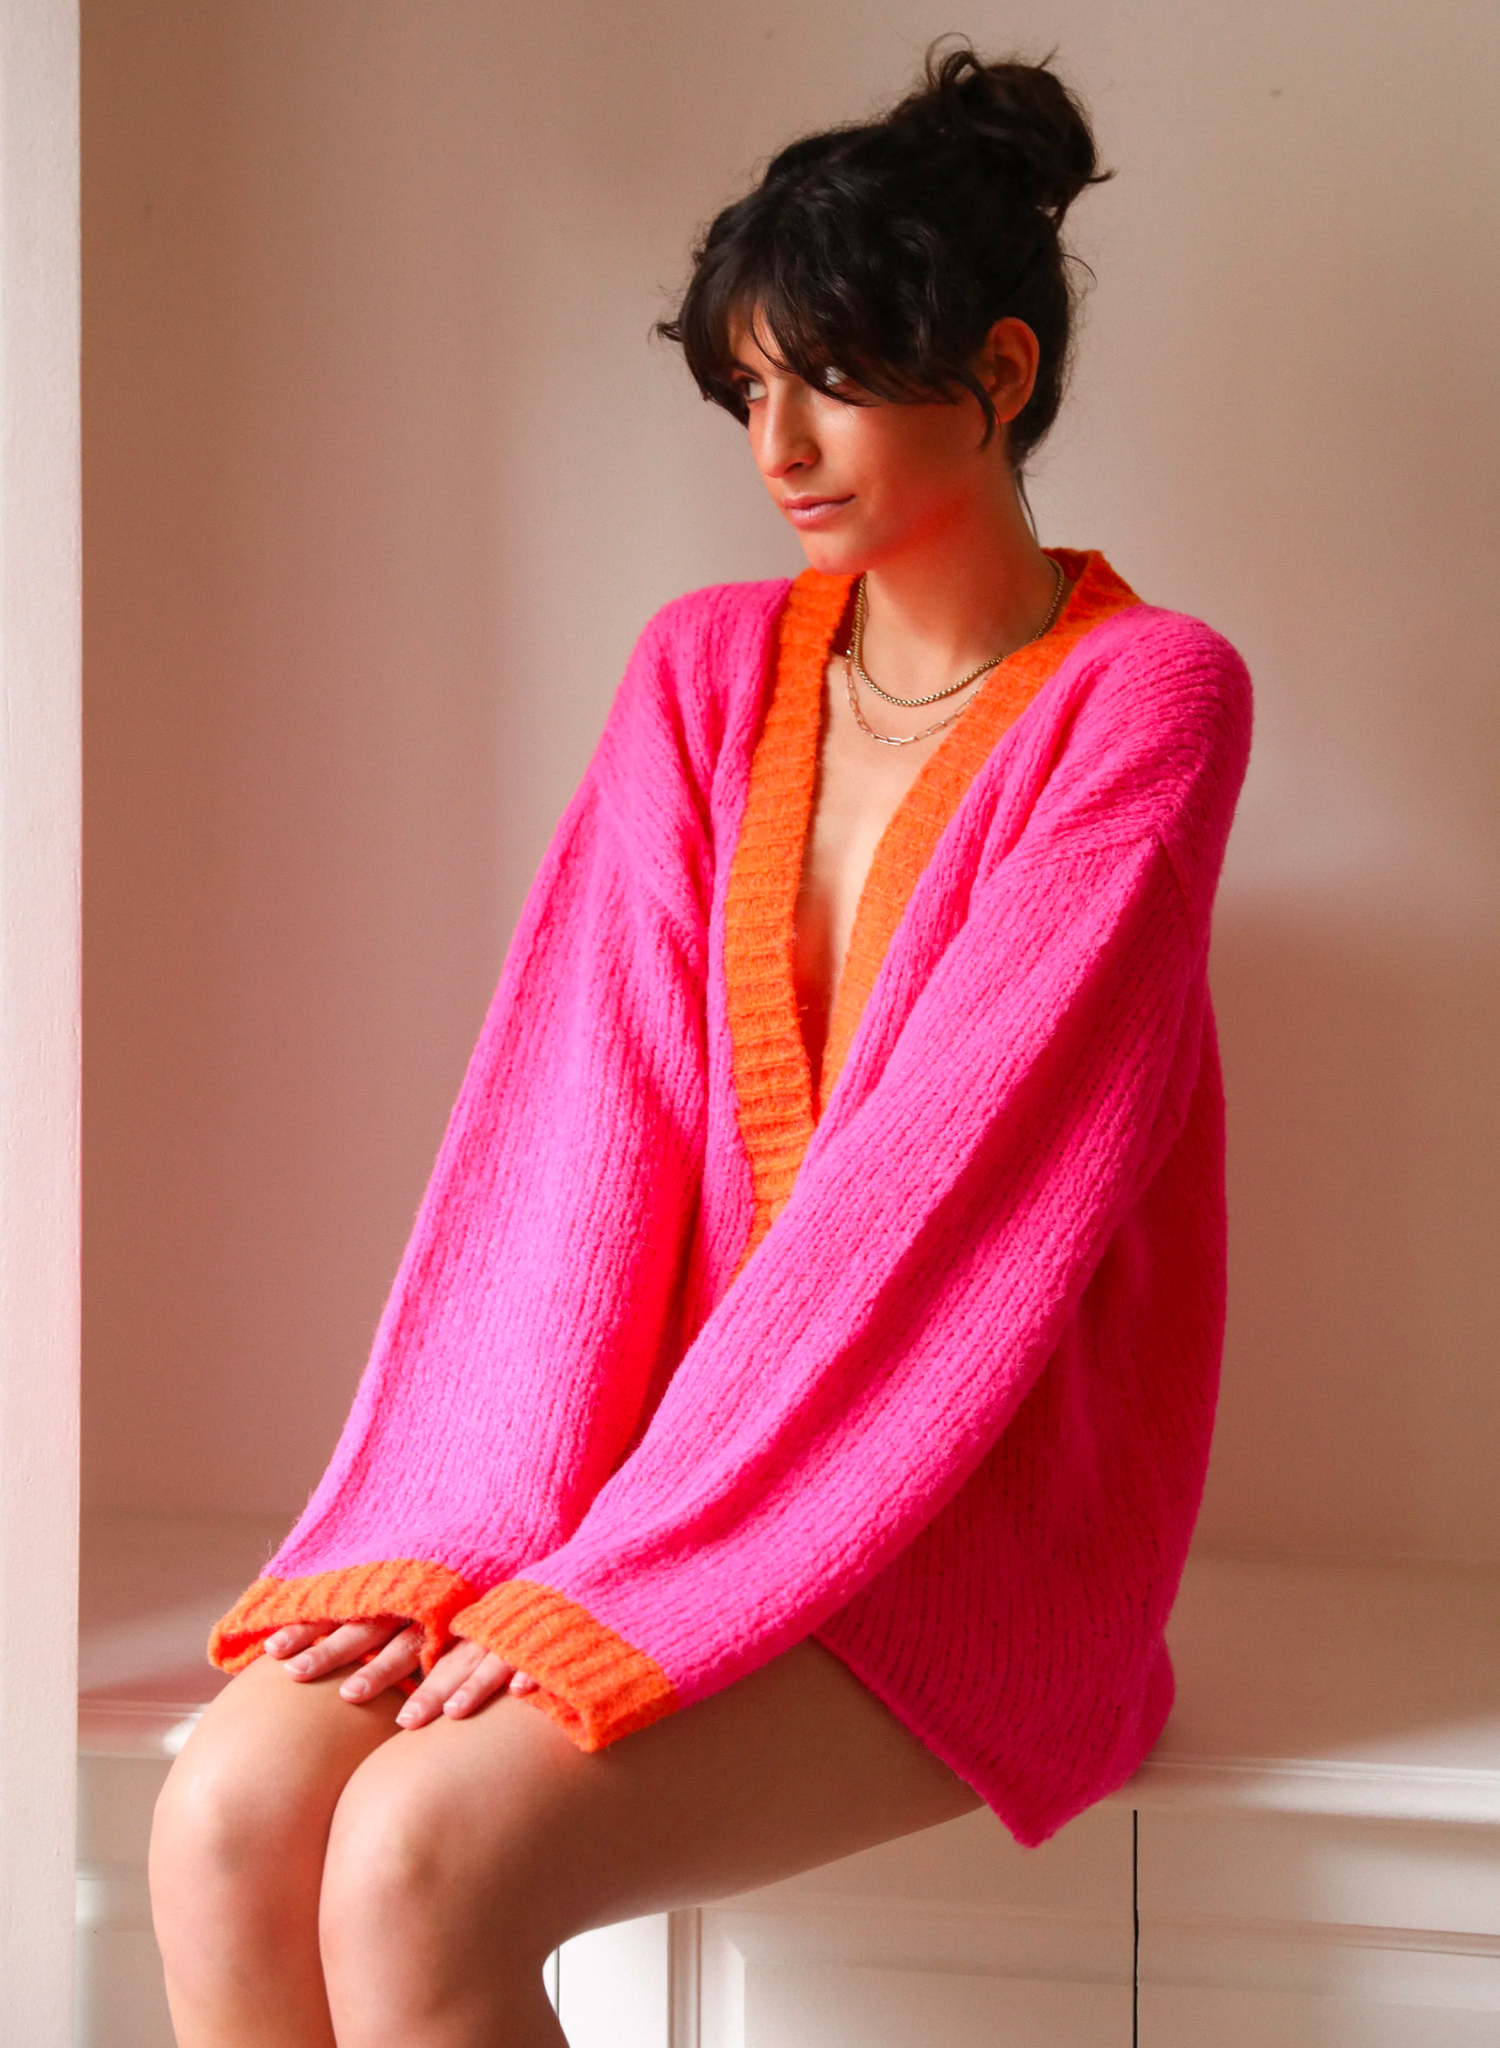 Blair Cardigan in Pink/Orange Colourway. The Winter staple you have been waiting for. A dream piece. Carefully crafted from the softest and most lightweight yarn. It is like wrapping yourself into a soft cloud.  Comfortable fit.  All Andean's beautiful pieces are hand-made with Love - measurements and colour may slightly vary.